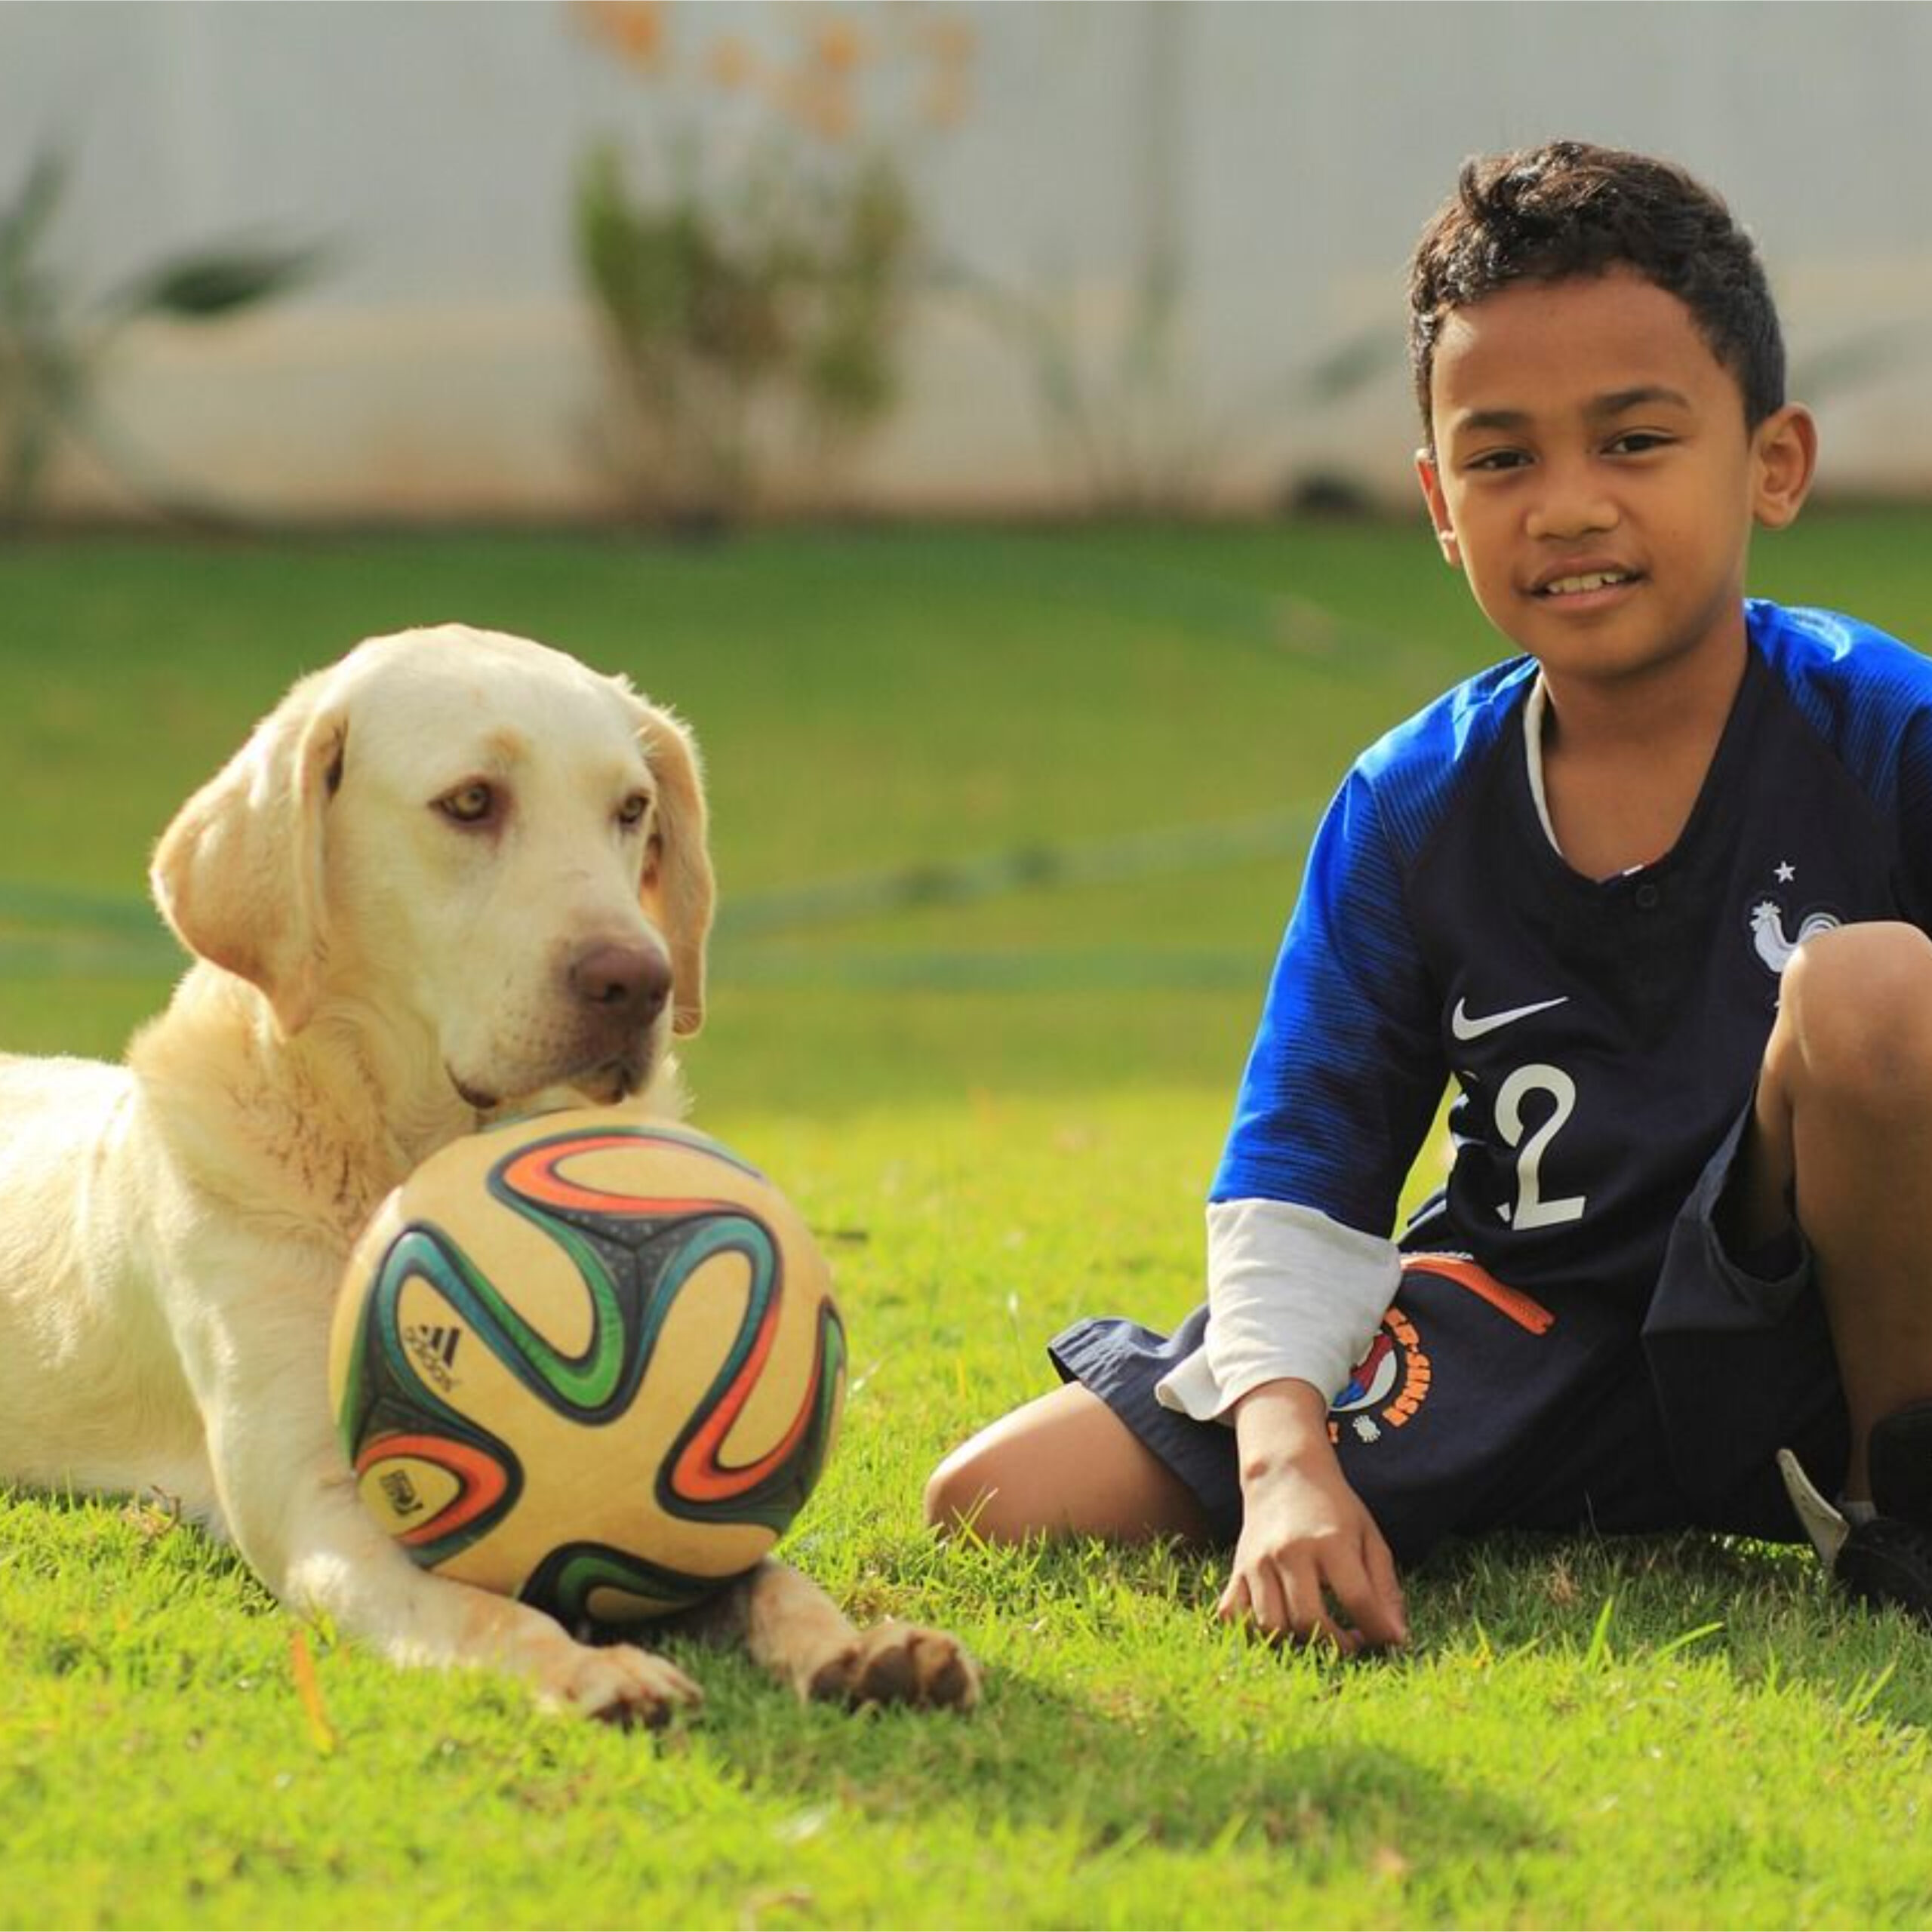 Fostering Responsible Pet Ownership: Fun Activities for Kids and Dogs